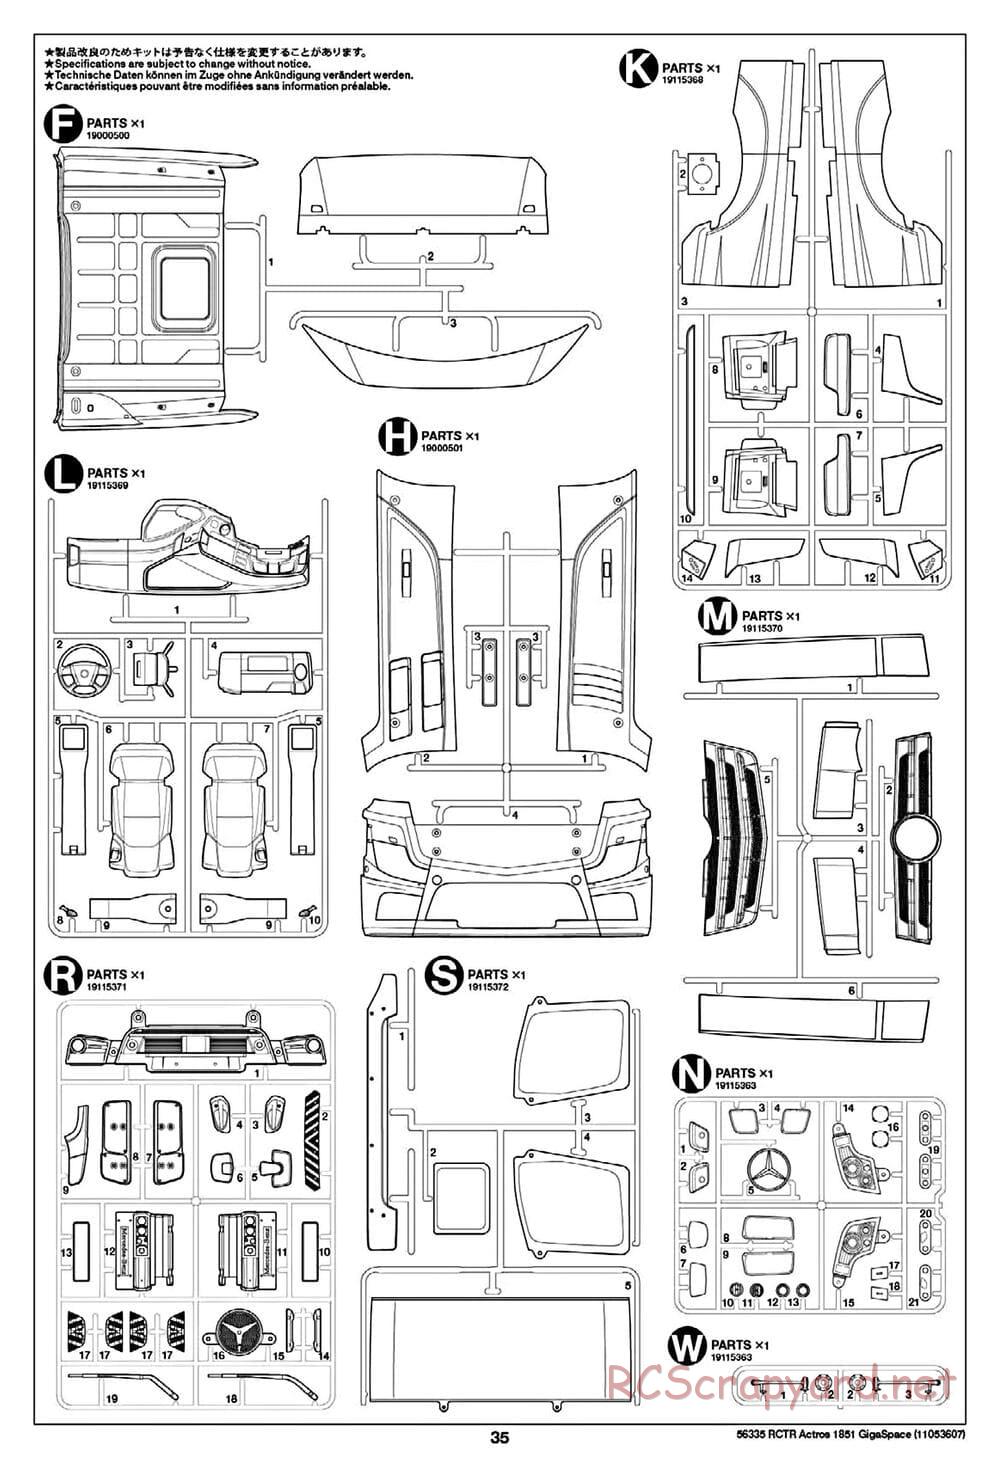 Tamiya - Mercedes-Benz Actros 1851 Gigaspace Tractor Truck Chassis - Manual - Page 35